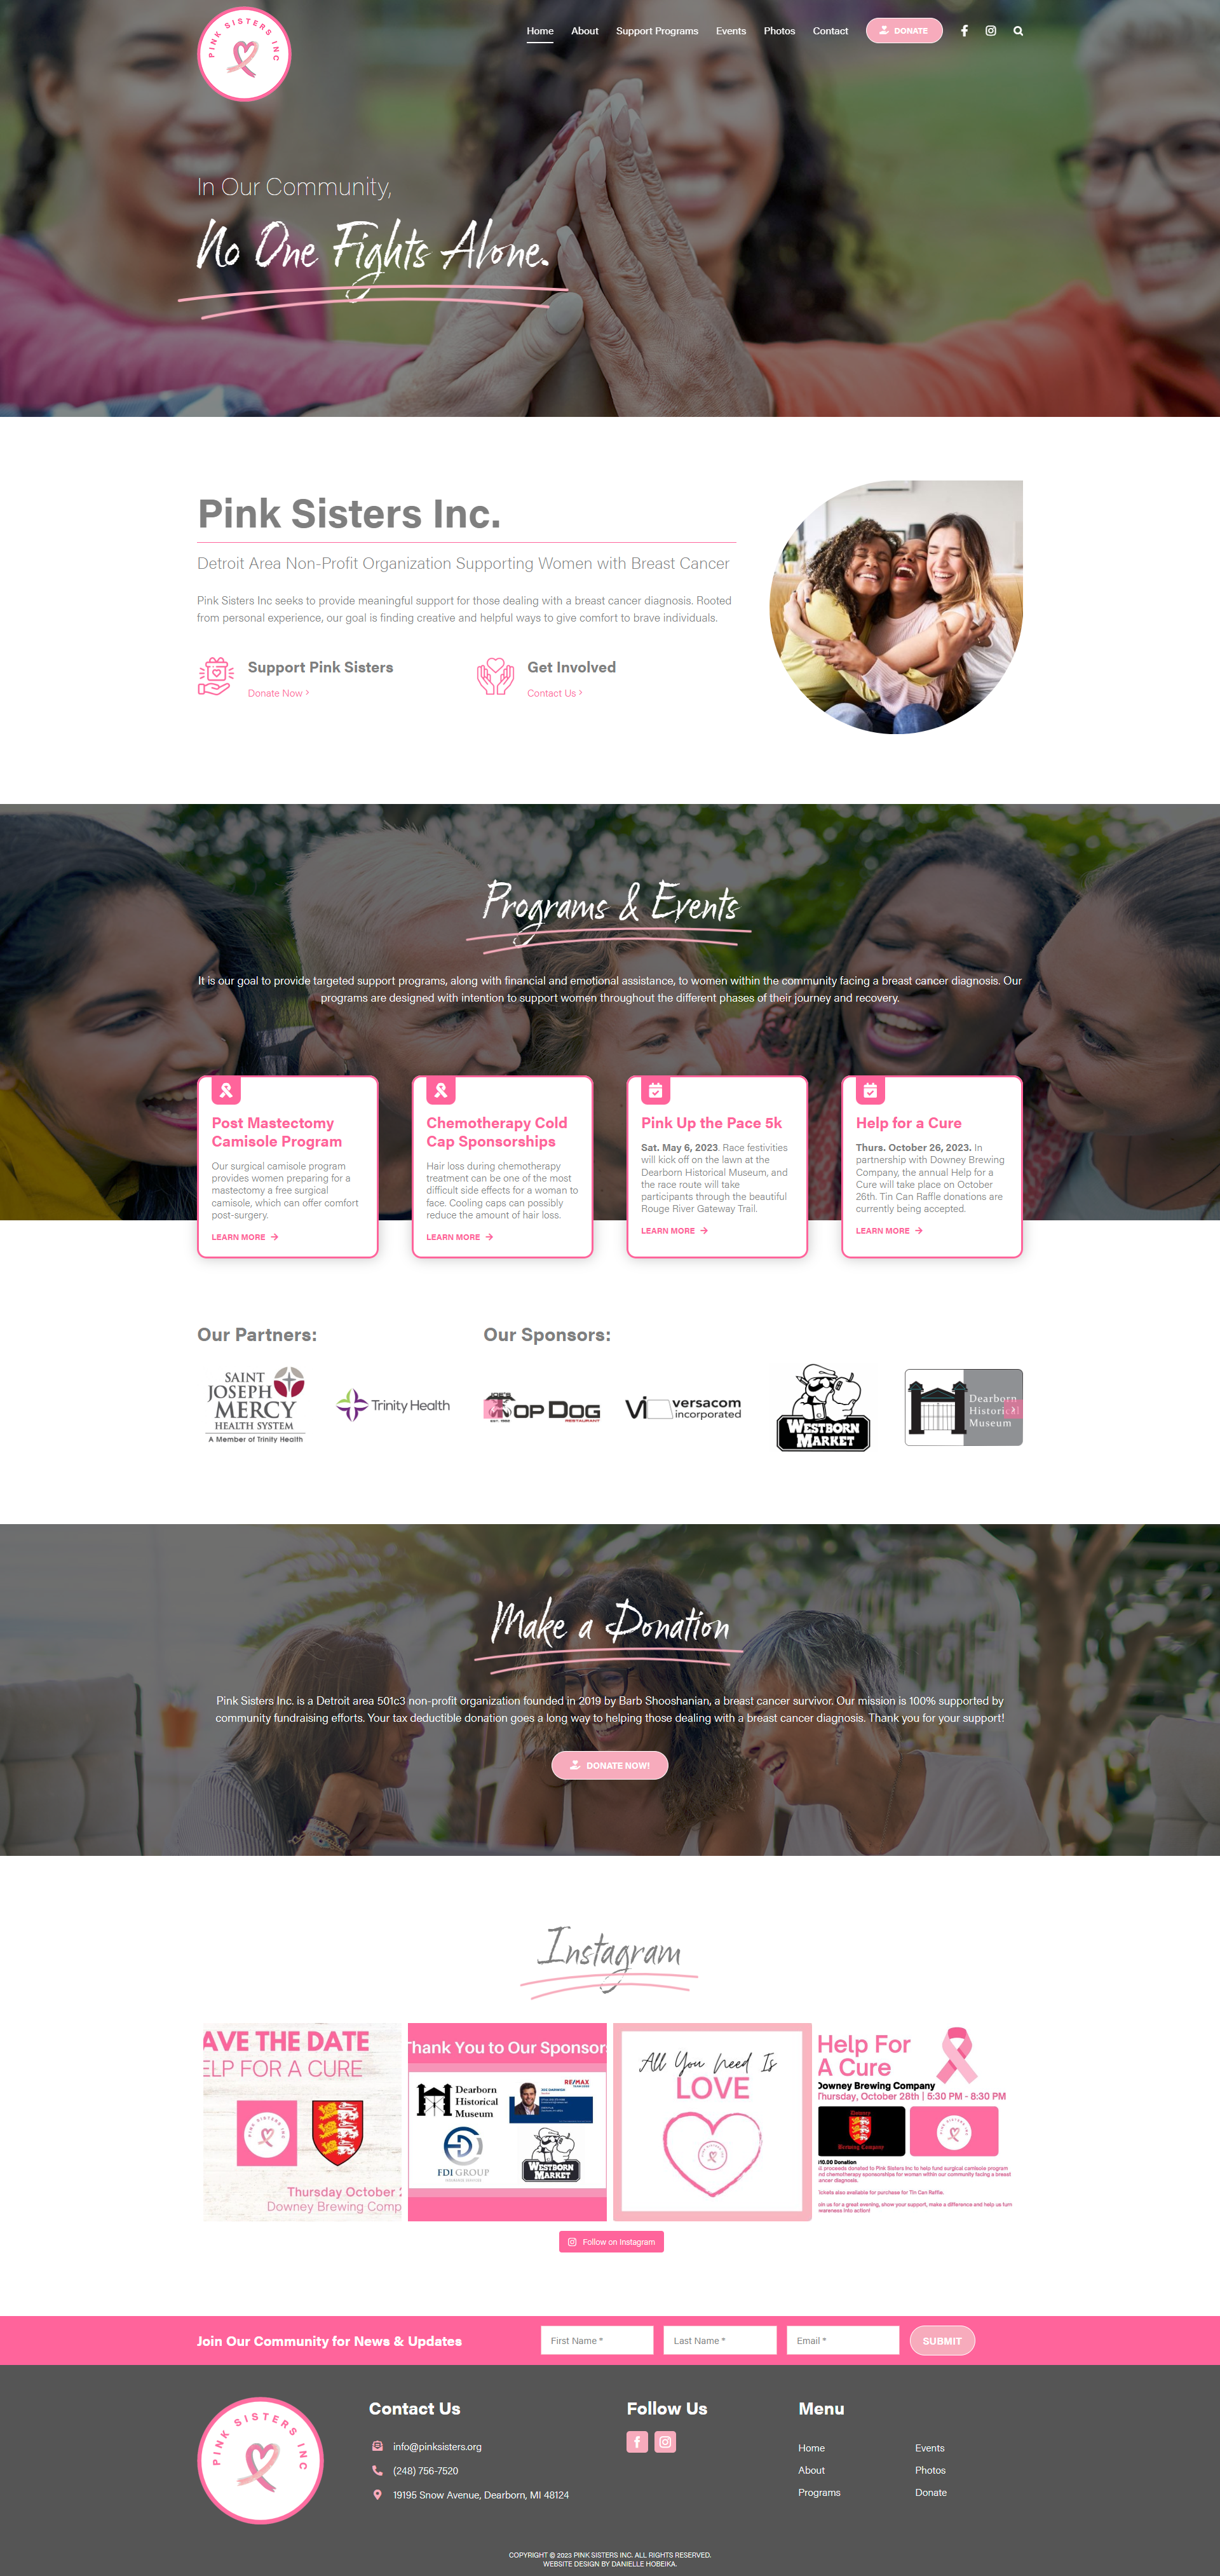 Web design for Pink Sisters Inc.